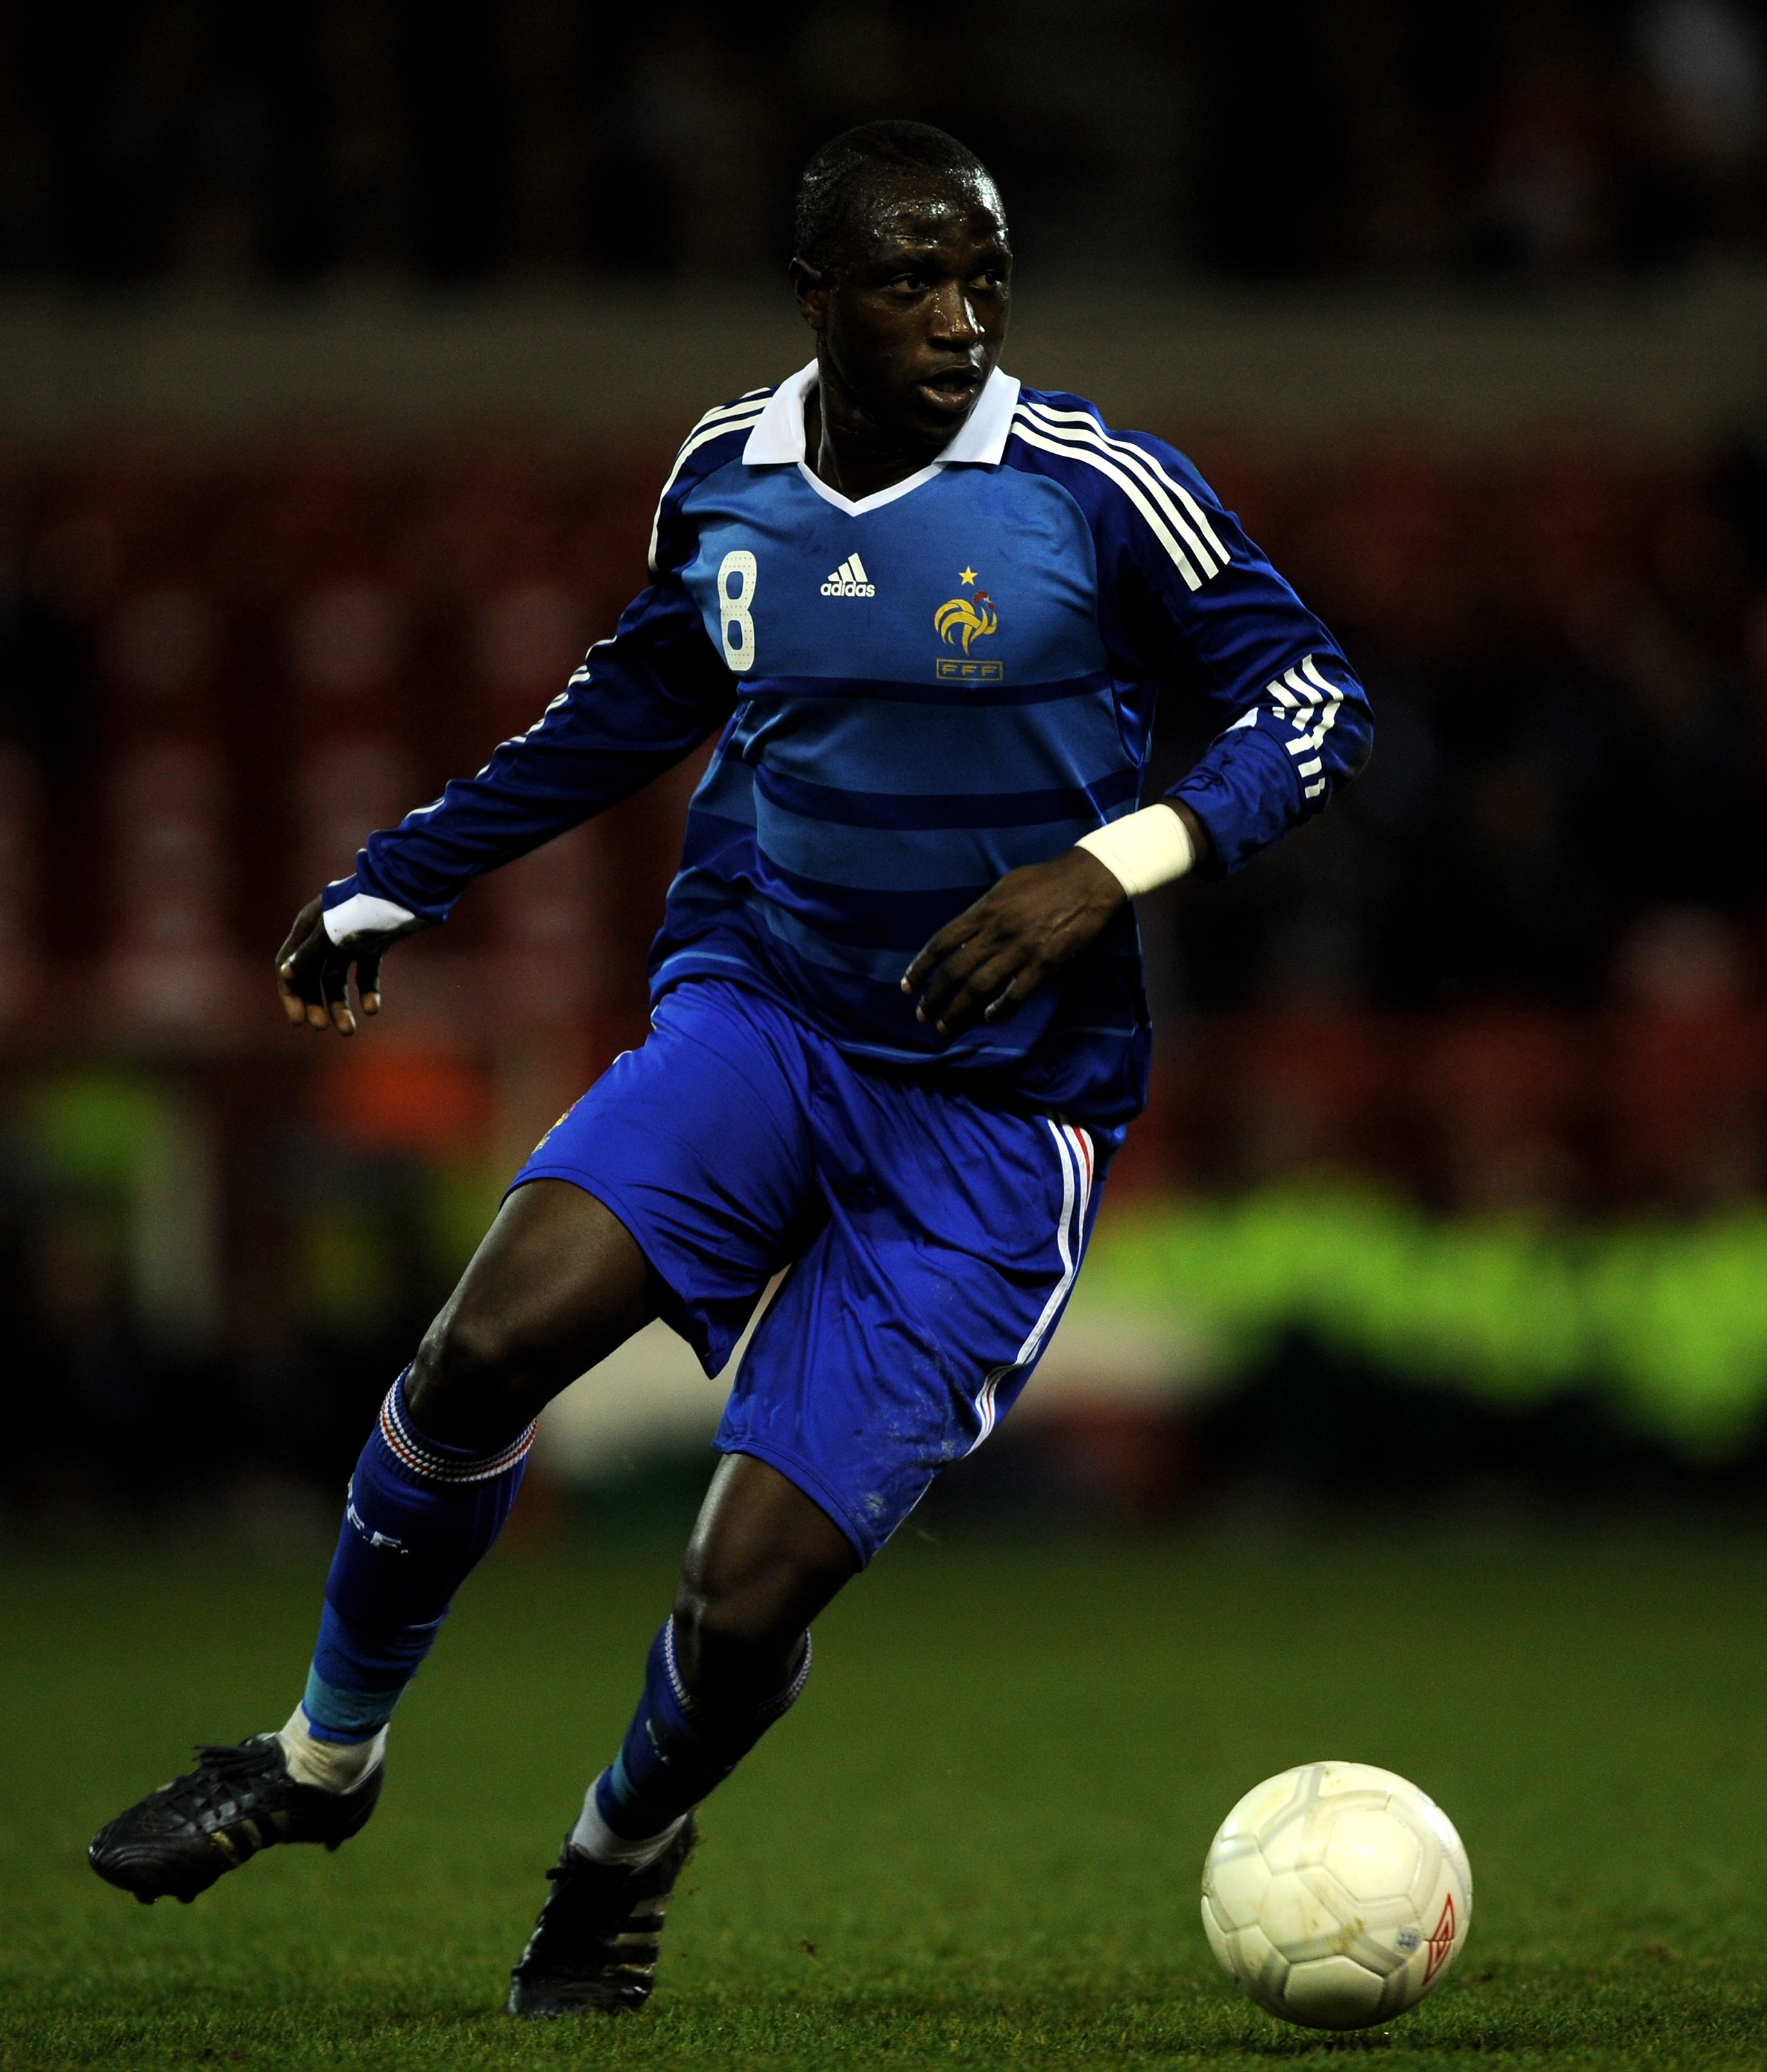 NOTTINGHAM, UNITED KINGDOM - MARCH 31:  Moussa Sissoko of France during the Friendly International match between England U21 and France U21 at the City Ground on March 31, 2009 in Nottingham, England.  (Photo by Shaun Botterill/Getty Images)